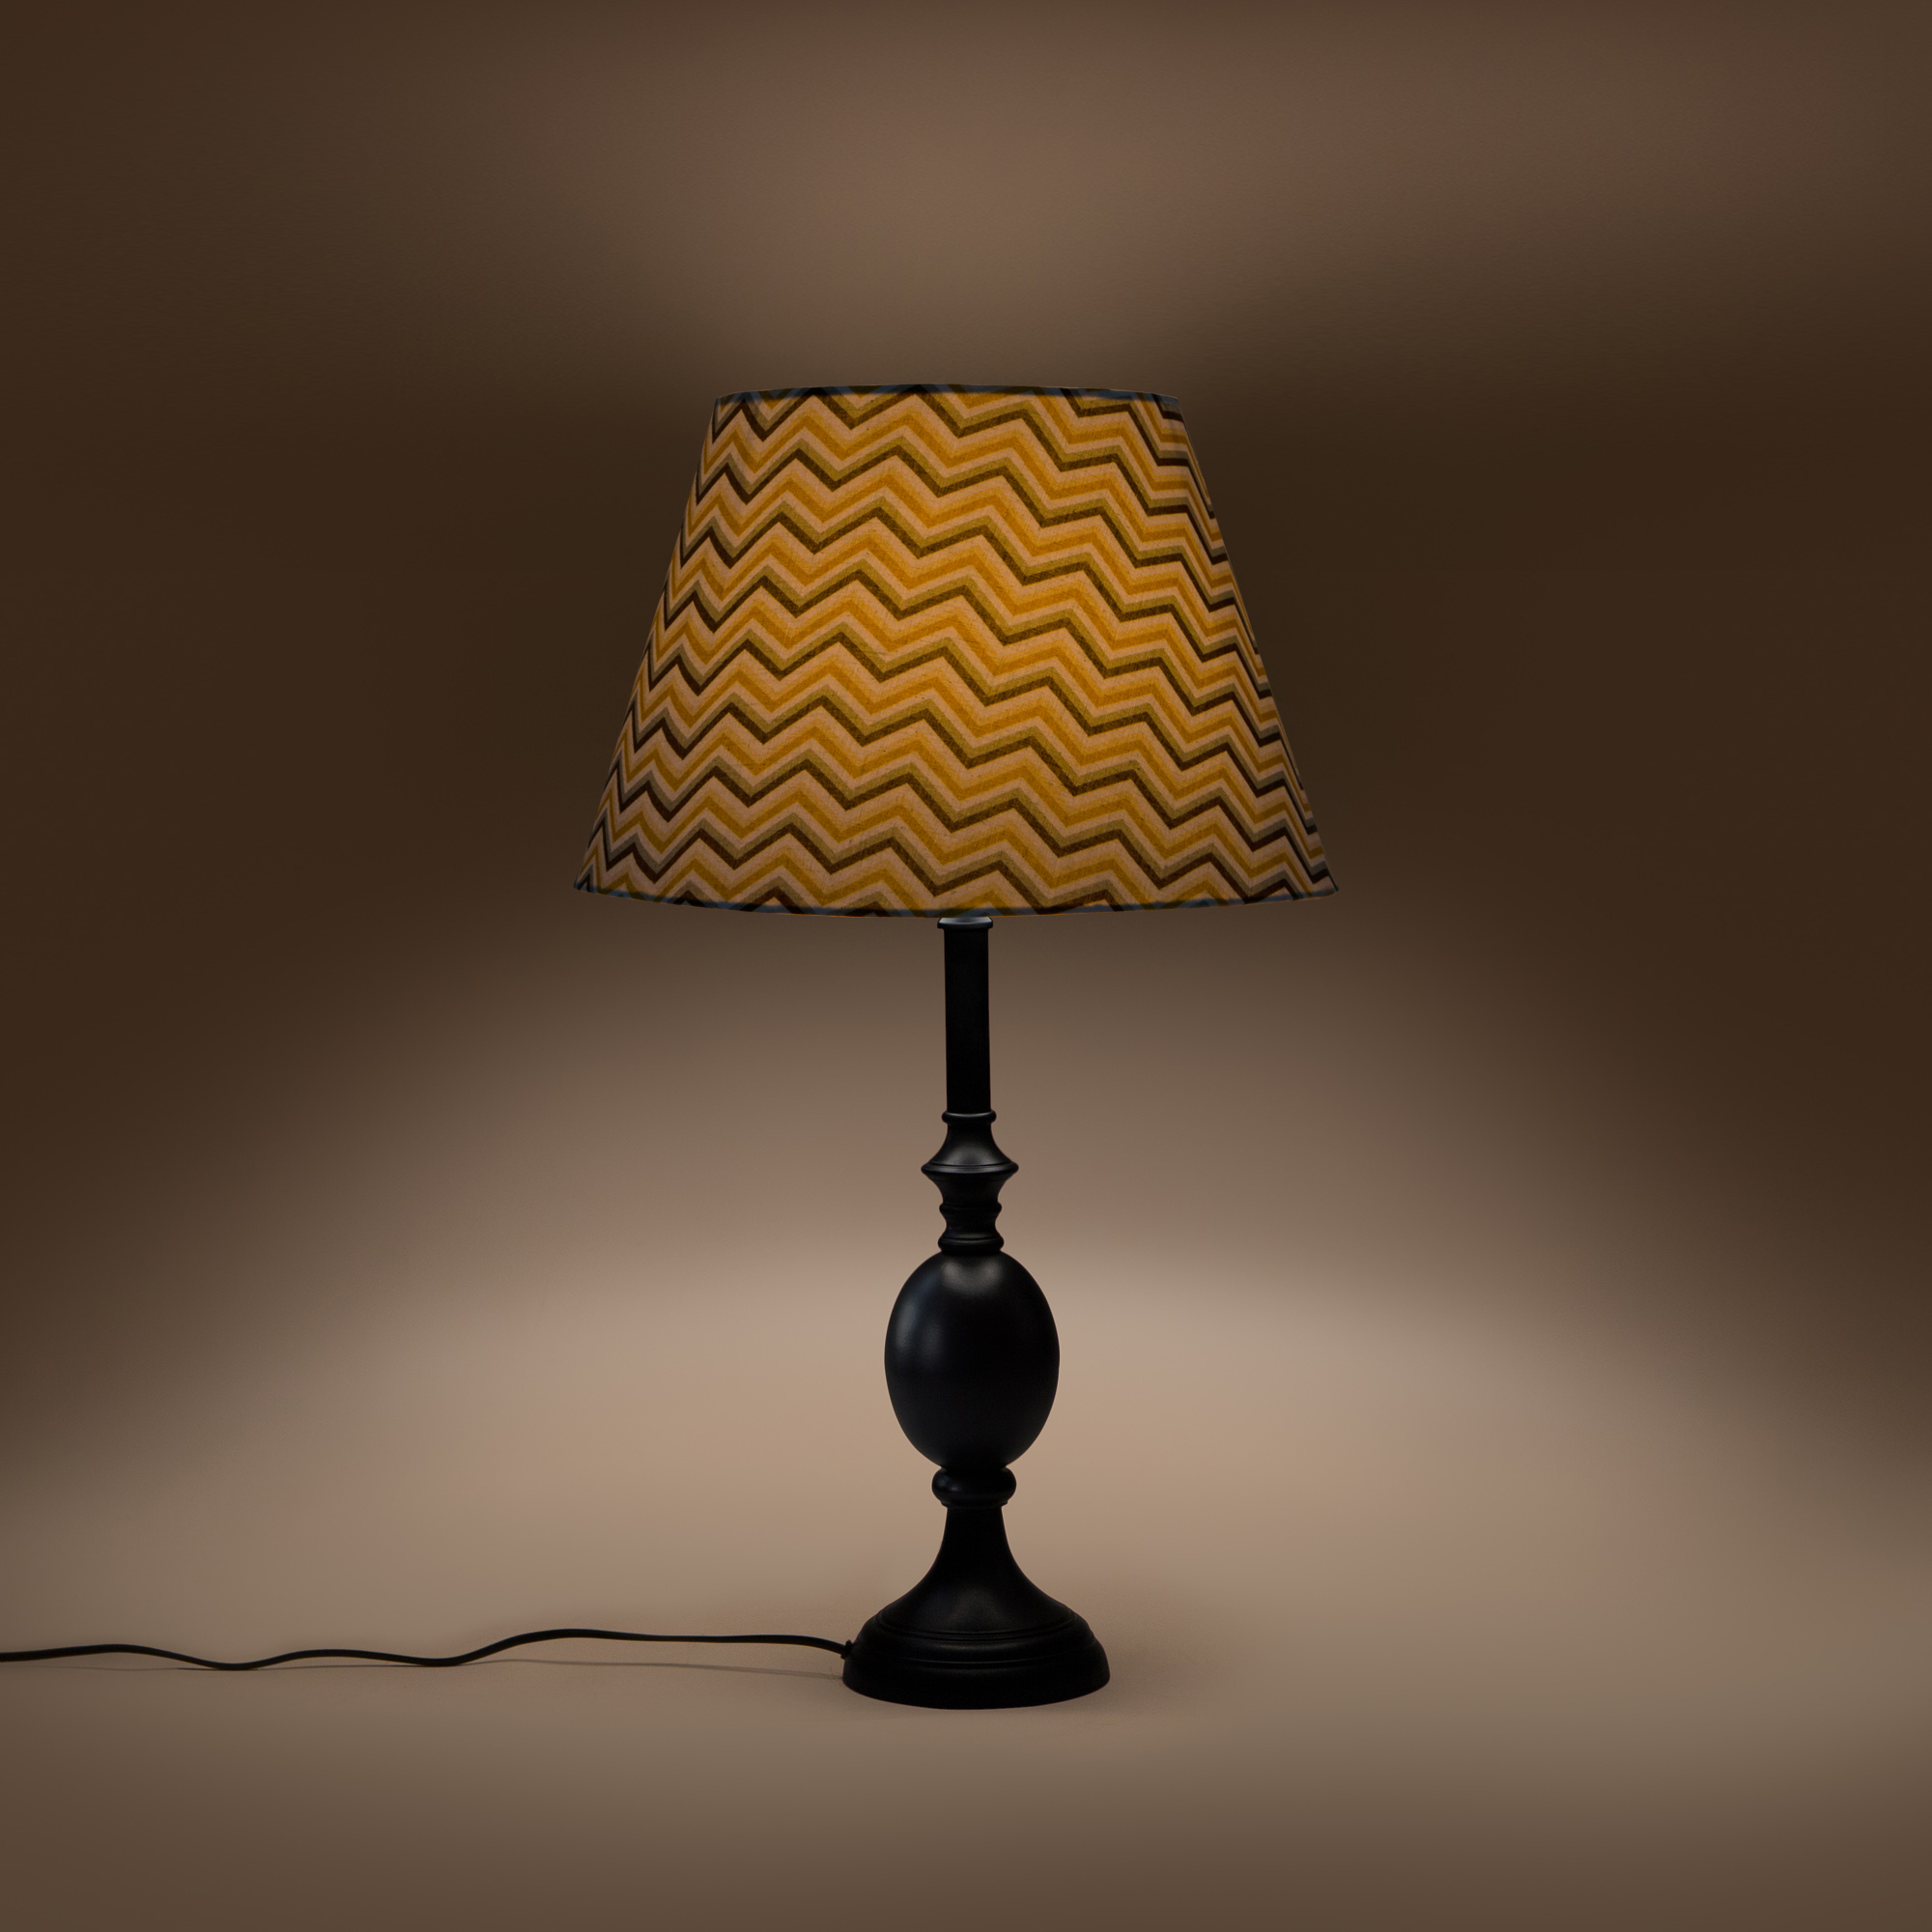 Cottage Bell Lampshade - Large - Chevrons